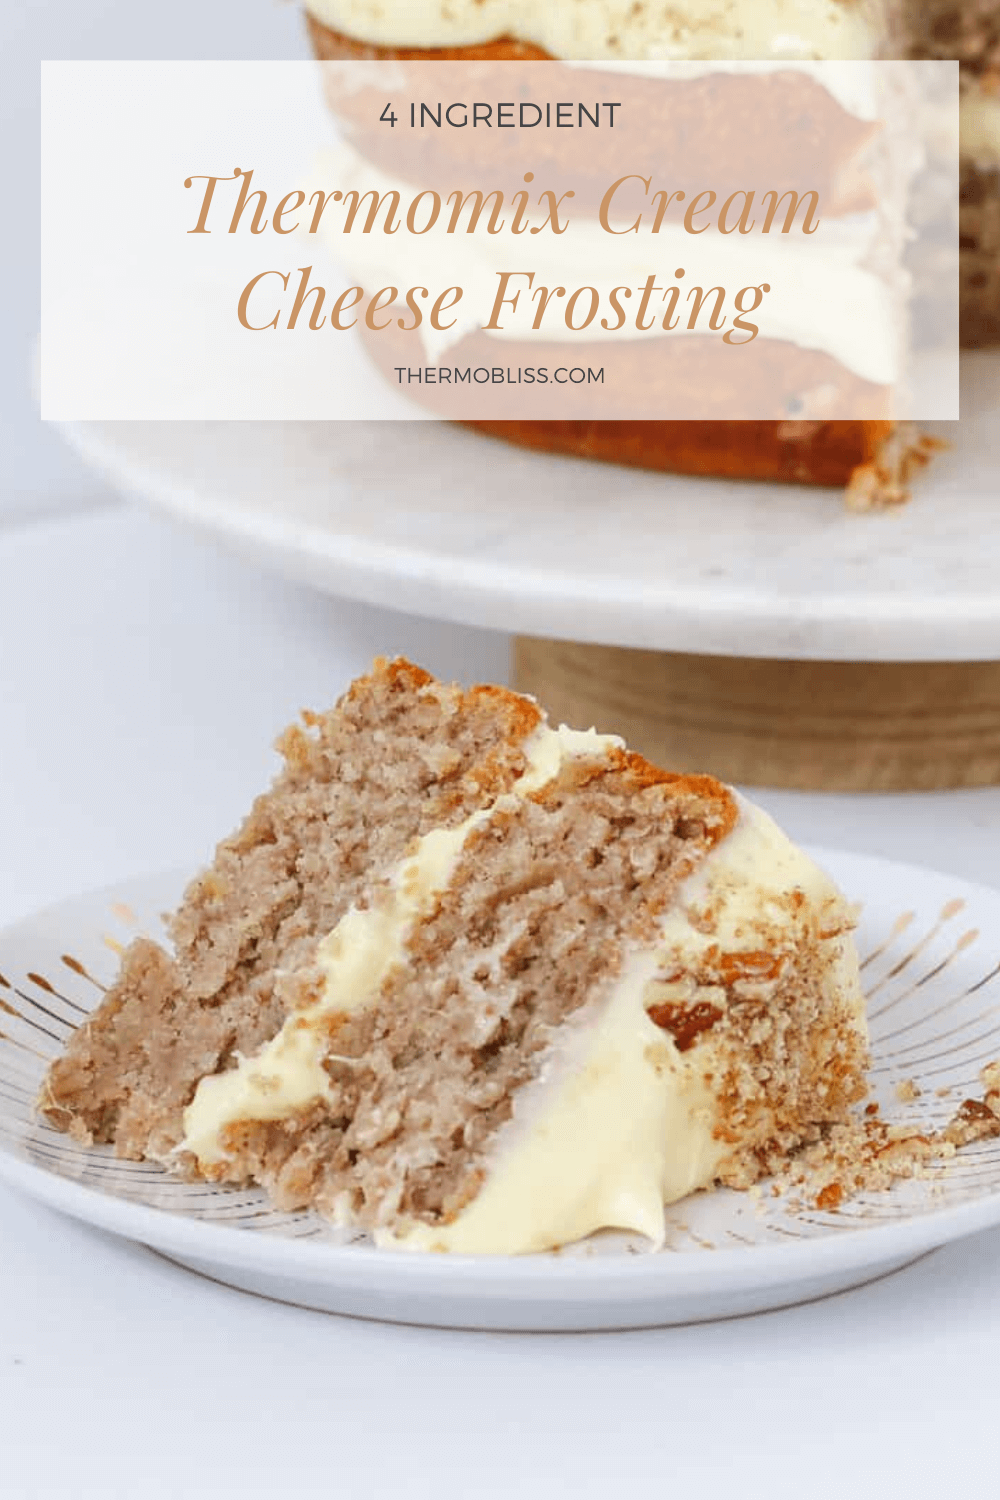 A Pinterest image of a piece of frosted cake with the text overlay 'Thermomix Cream Cheese Frosting'